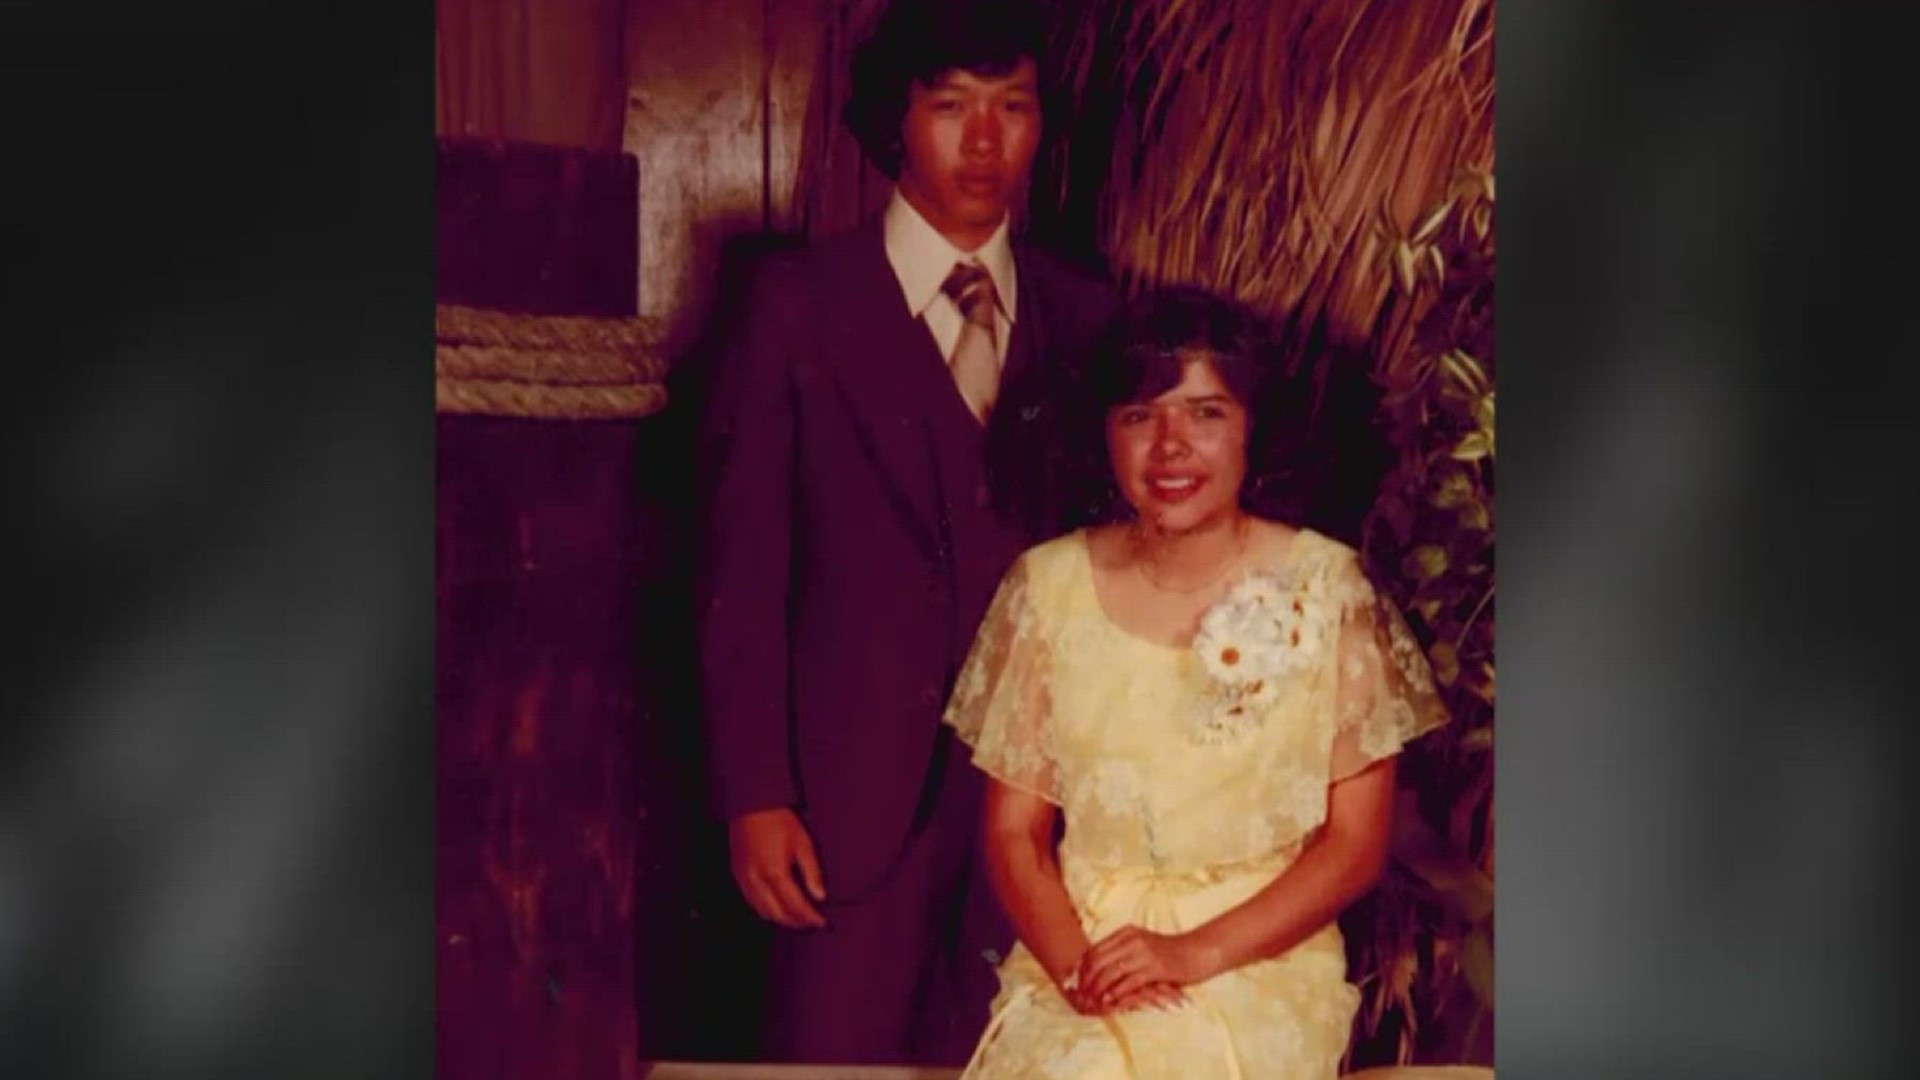 The month of May celebrates Asian American Pacific Islander Heritage, and here in South Texas -- there is a rich Asian Culture with deep roots.